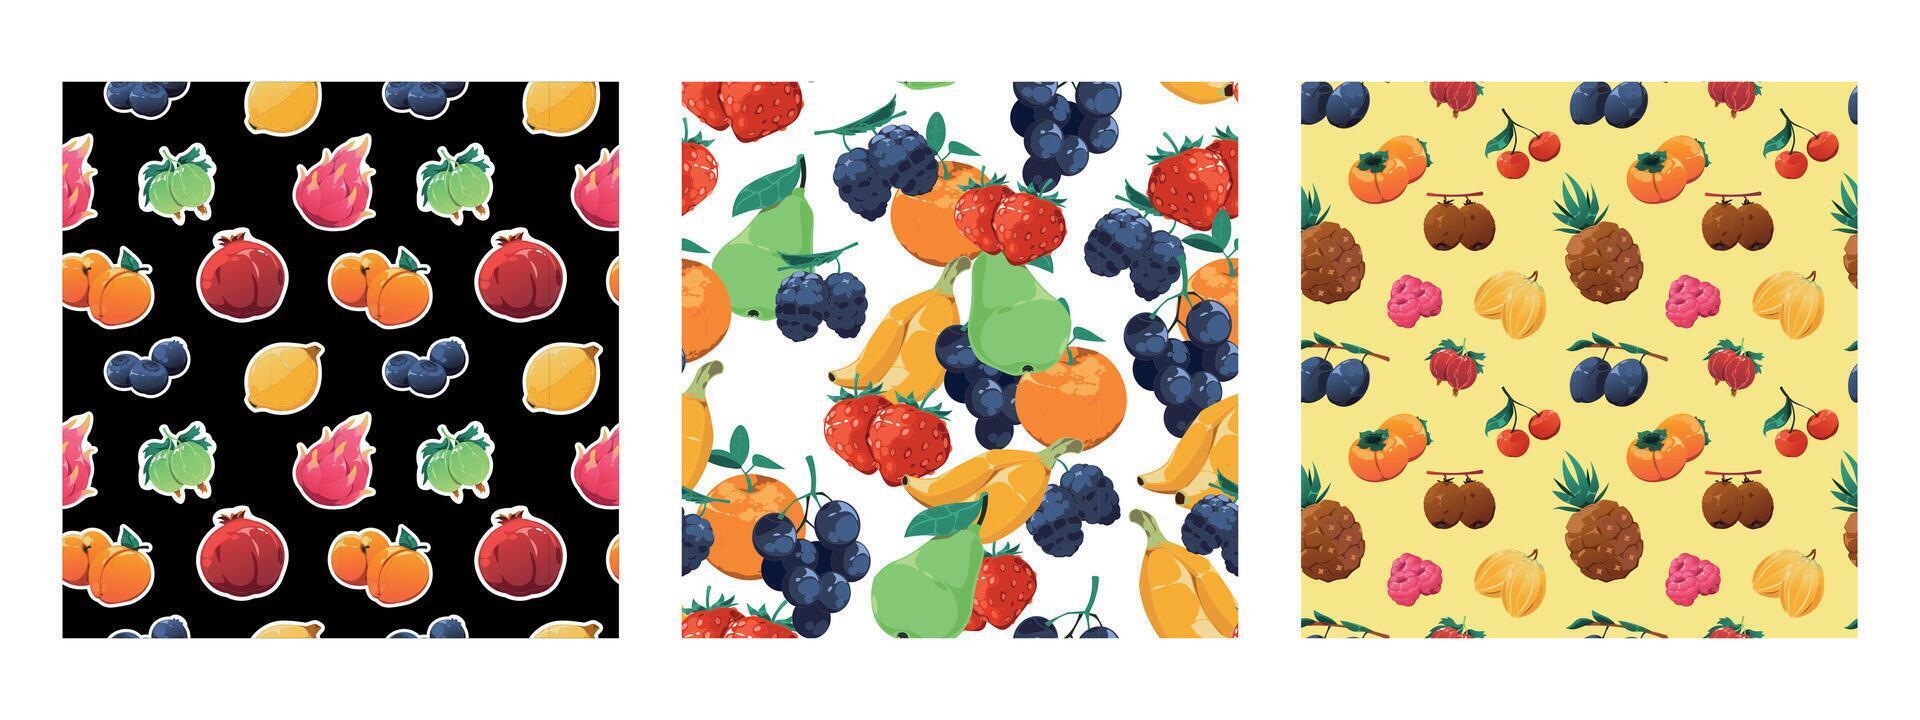 Cartoon fruit pattern. Seamless print of fresh exotic fruits, organic nutrition cover with mixed citrus apple strawberry banana pomegranate. Vector texture